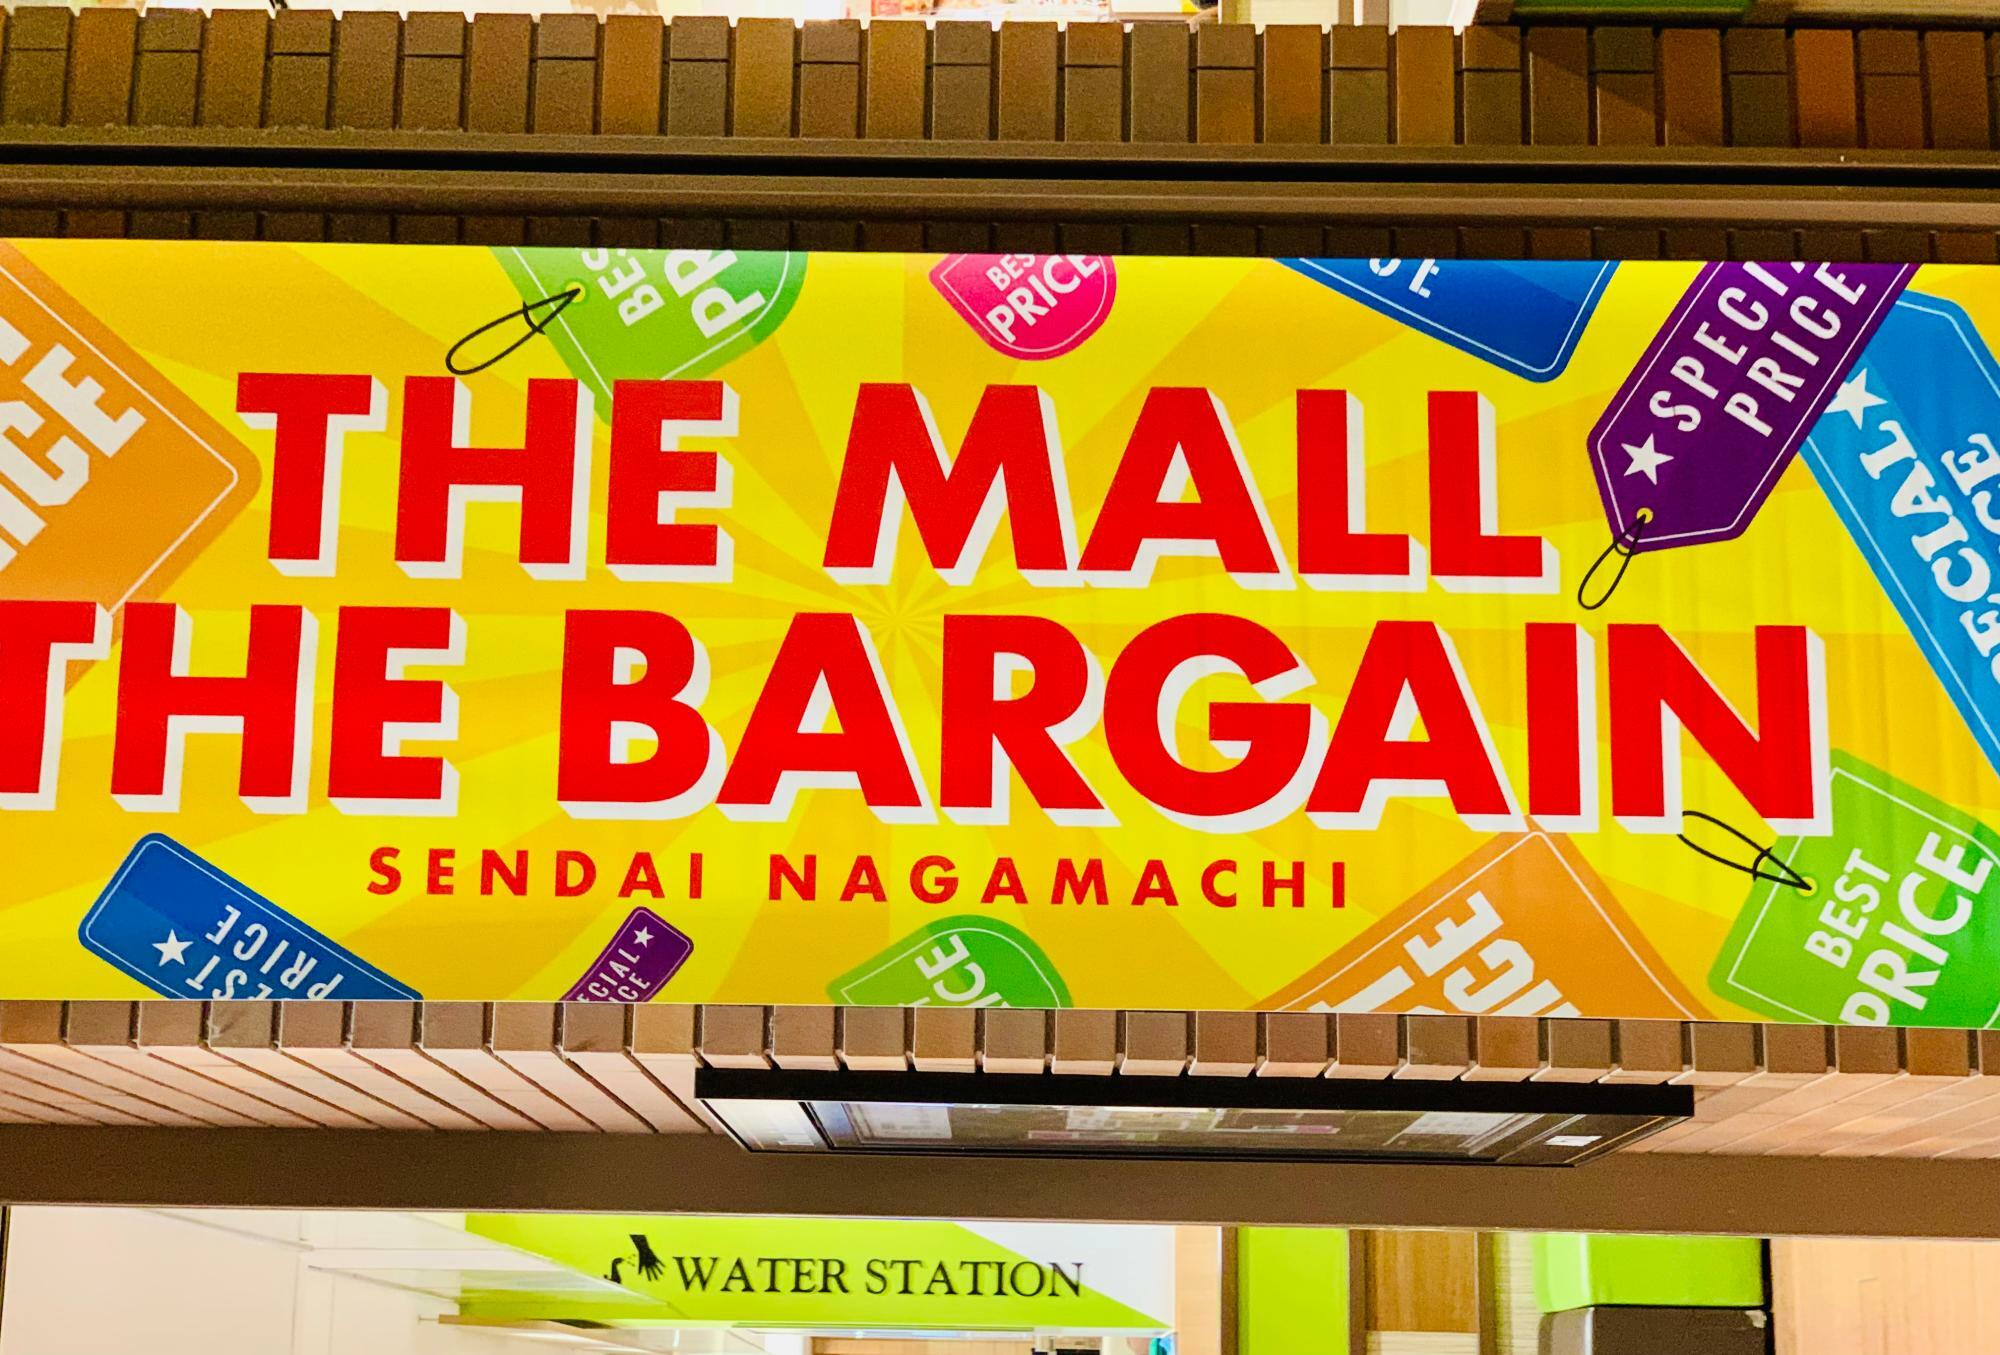 THE MALL THE BARGAIN